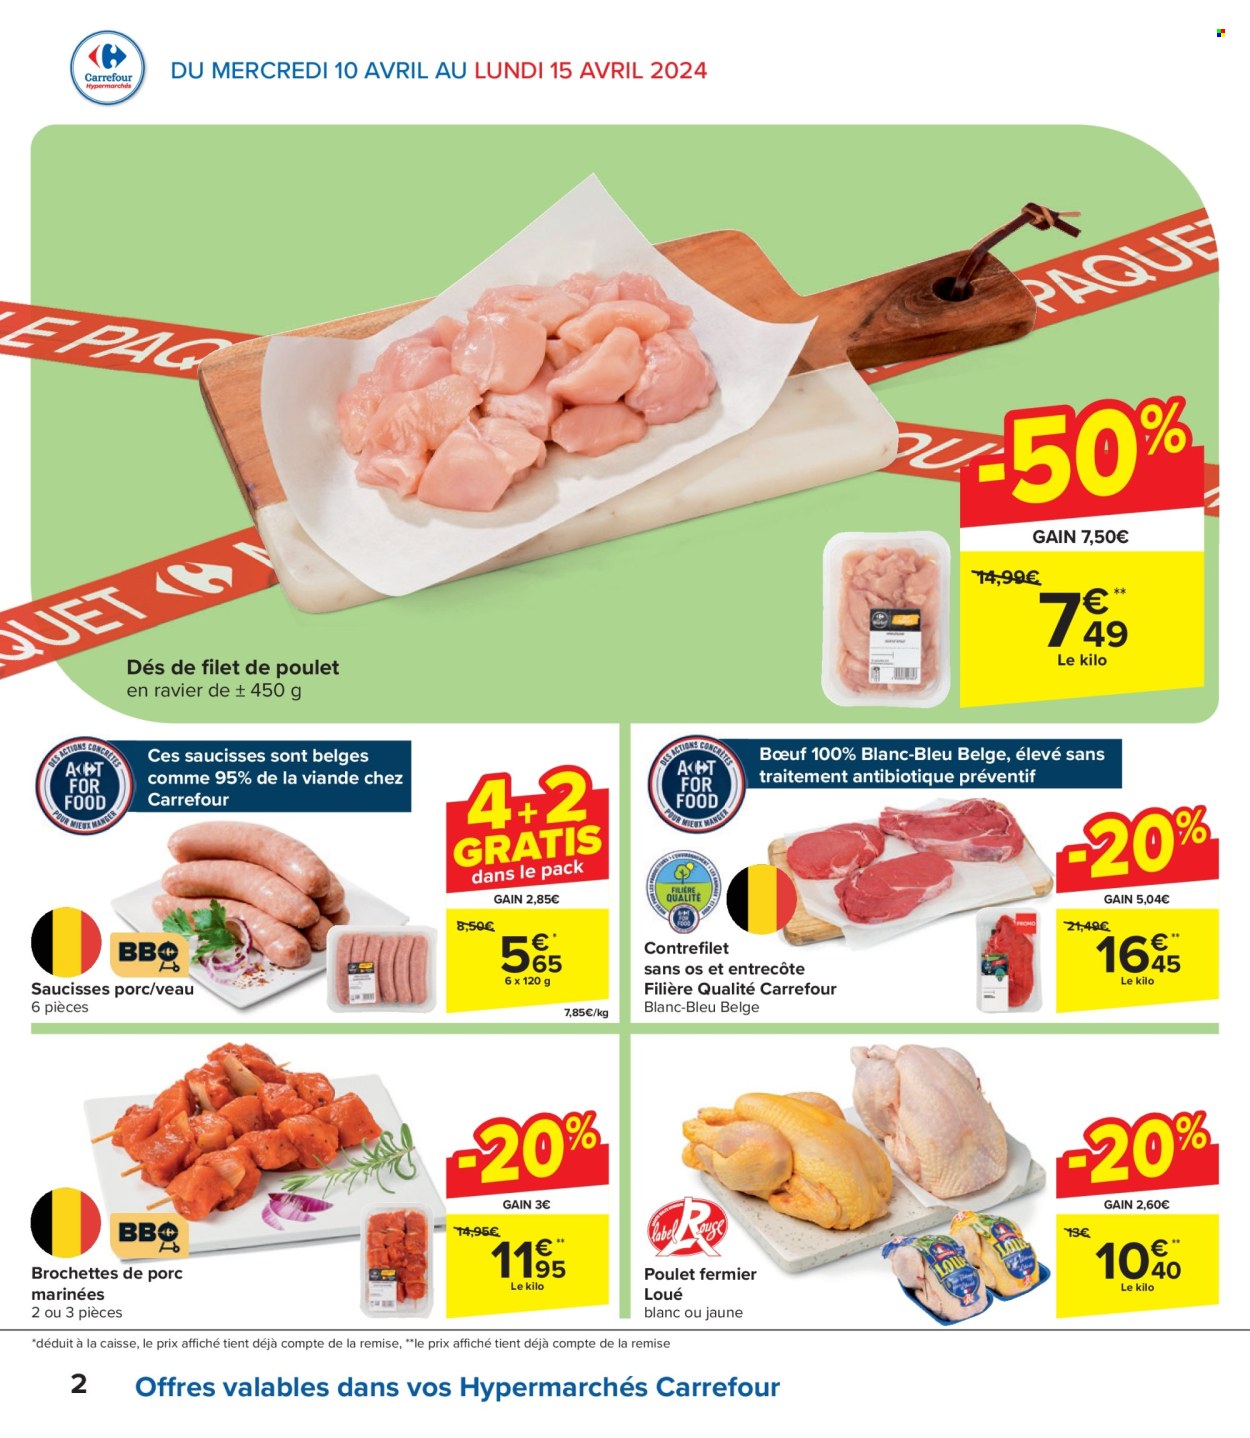 Catalogue Carrefour hypermarkt - 10.4.2024 - 22.4.2024. Page 2.